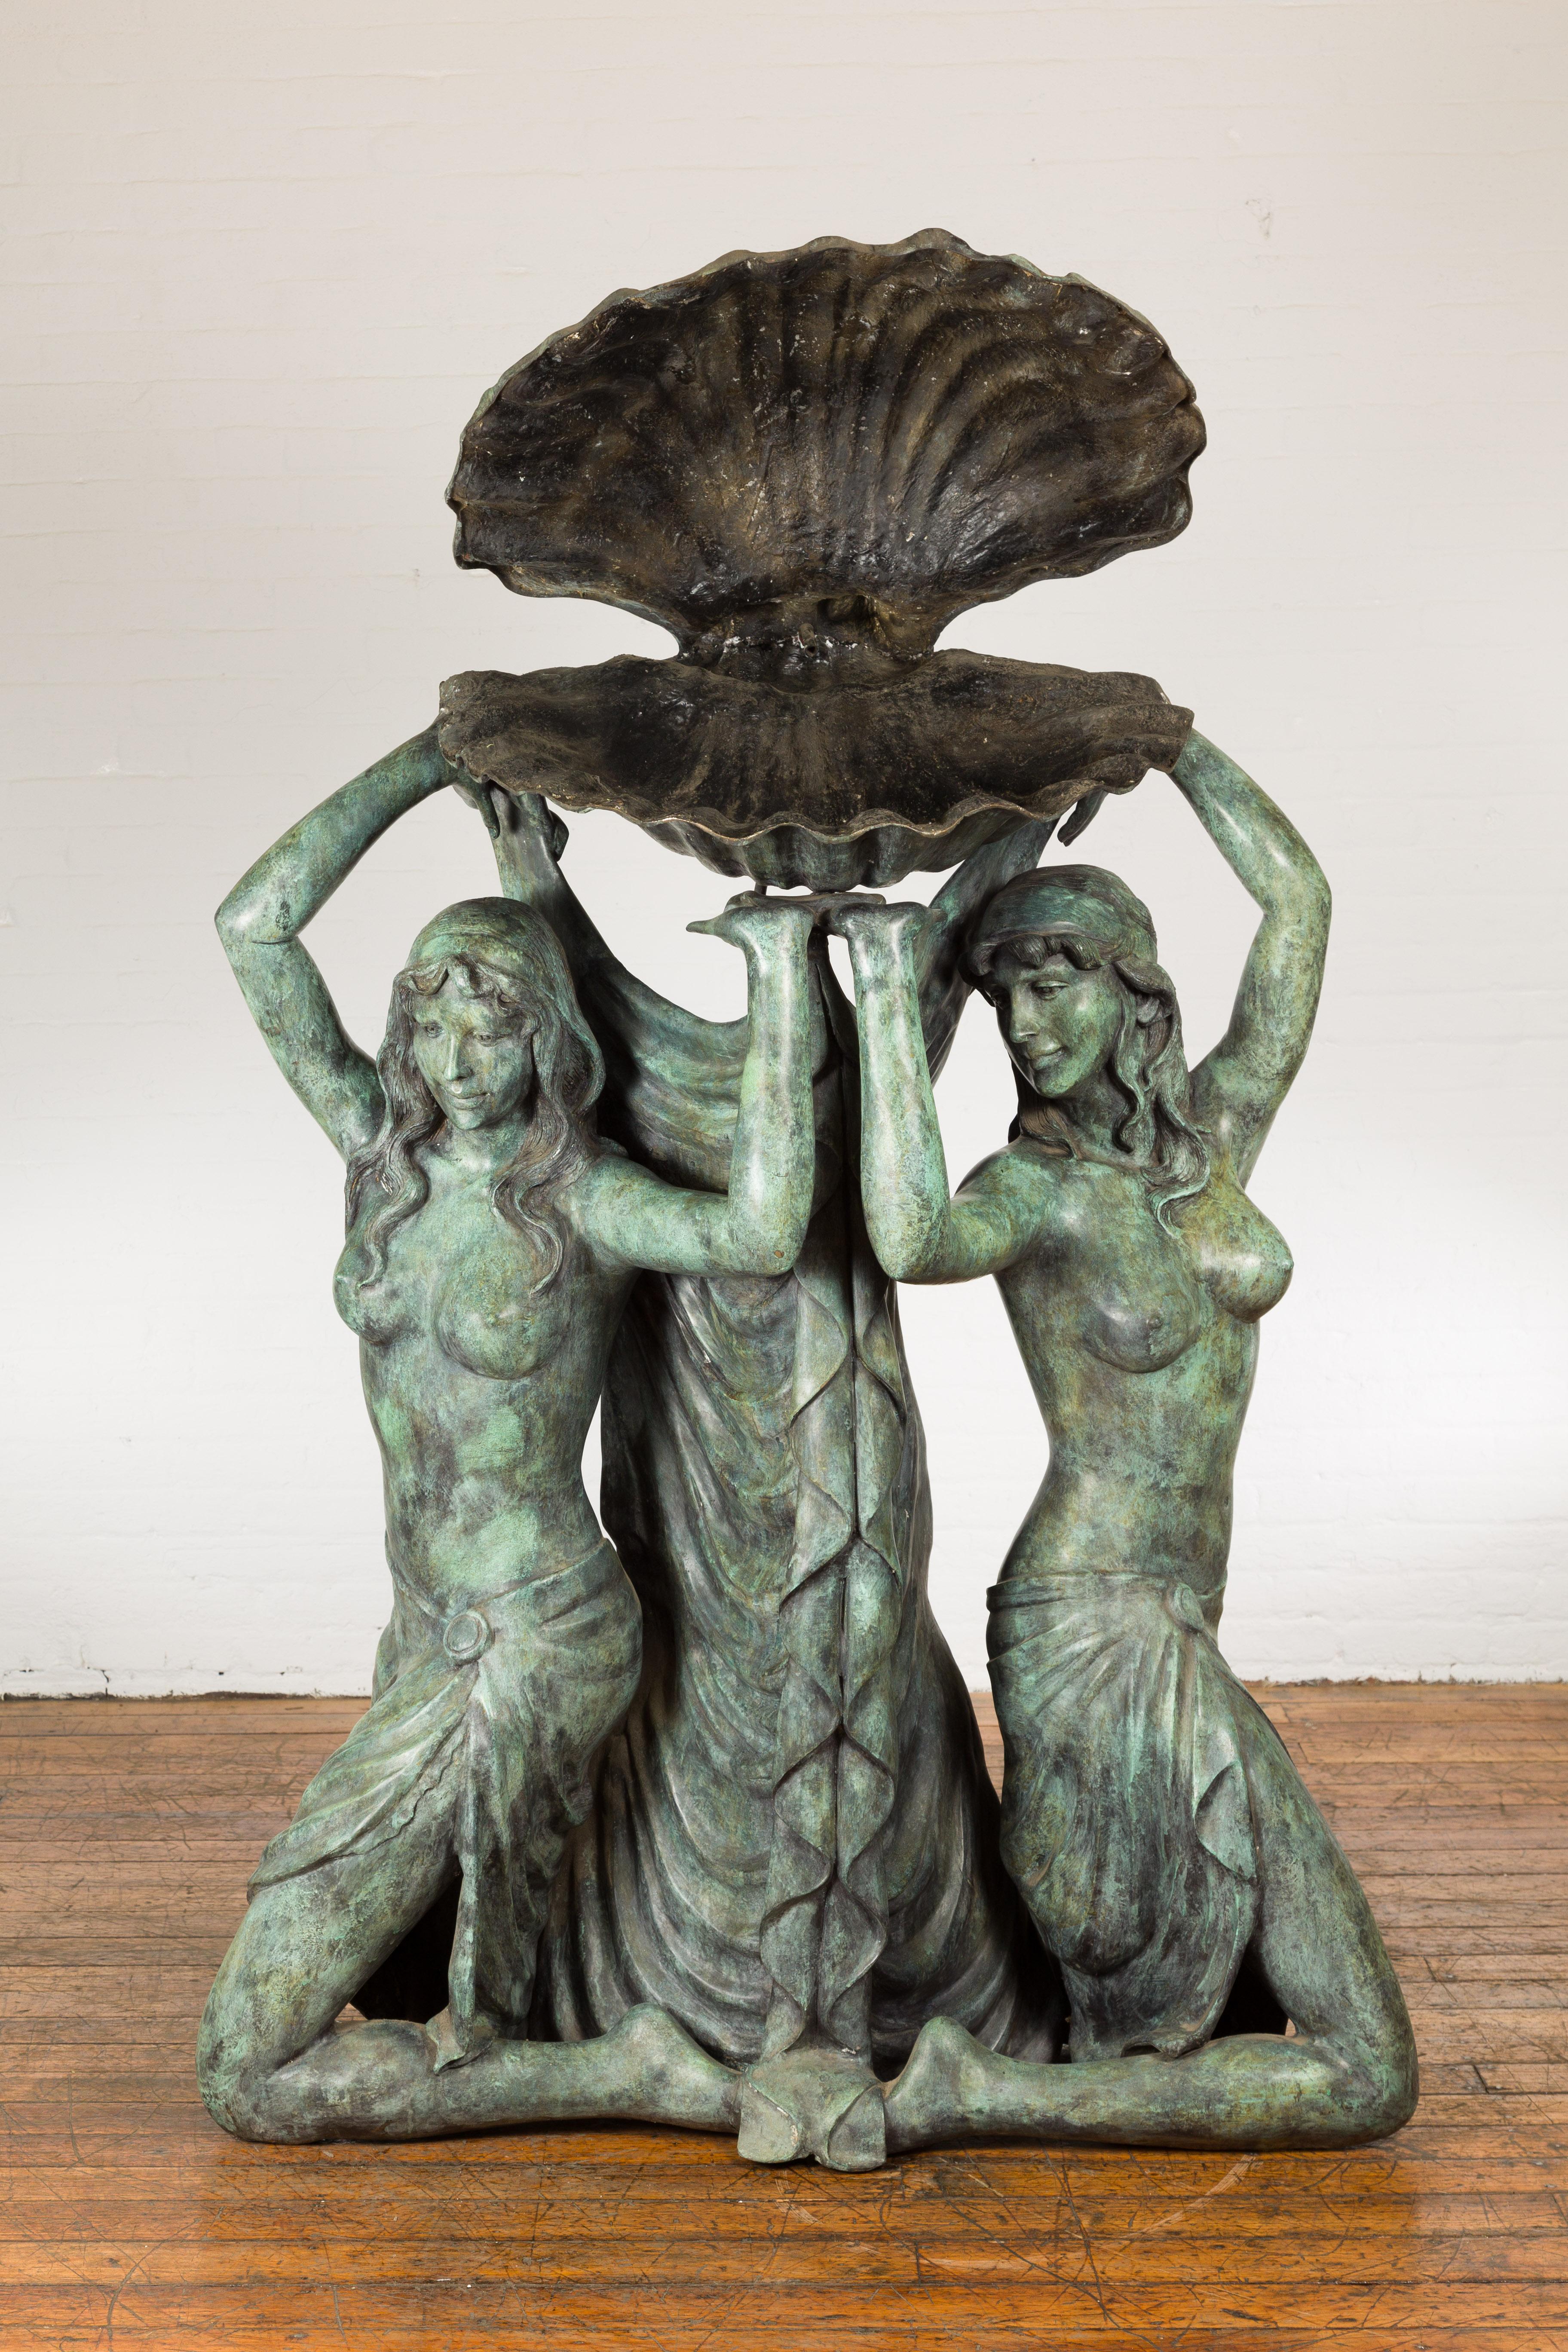 A Greco-Roman inspired lost wax cast bronze fountain depicting three nymphs holding a large shell above their heads. Delve into the ethereal beauty of this Greco-Roman inspired bronze fountain, showcasing the aesthetic precision of the lost-wax